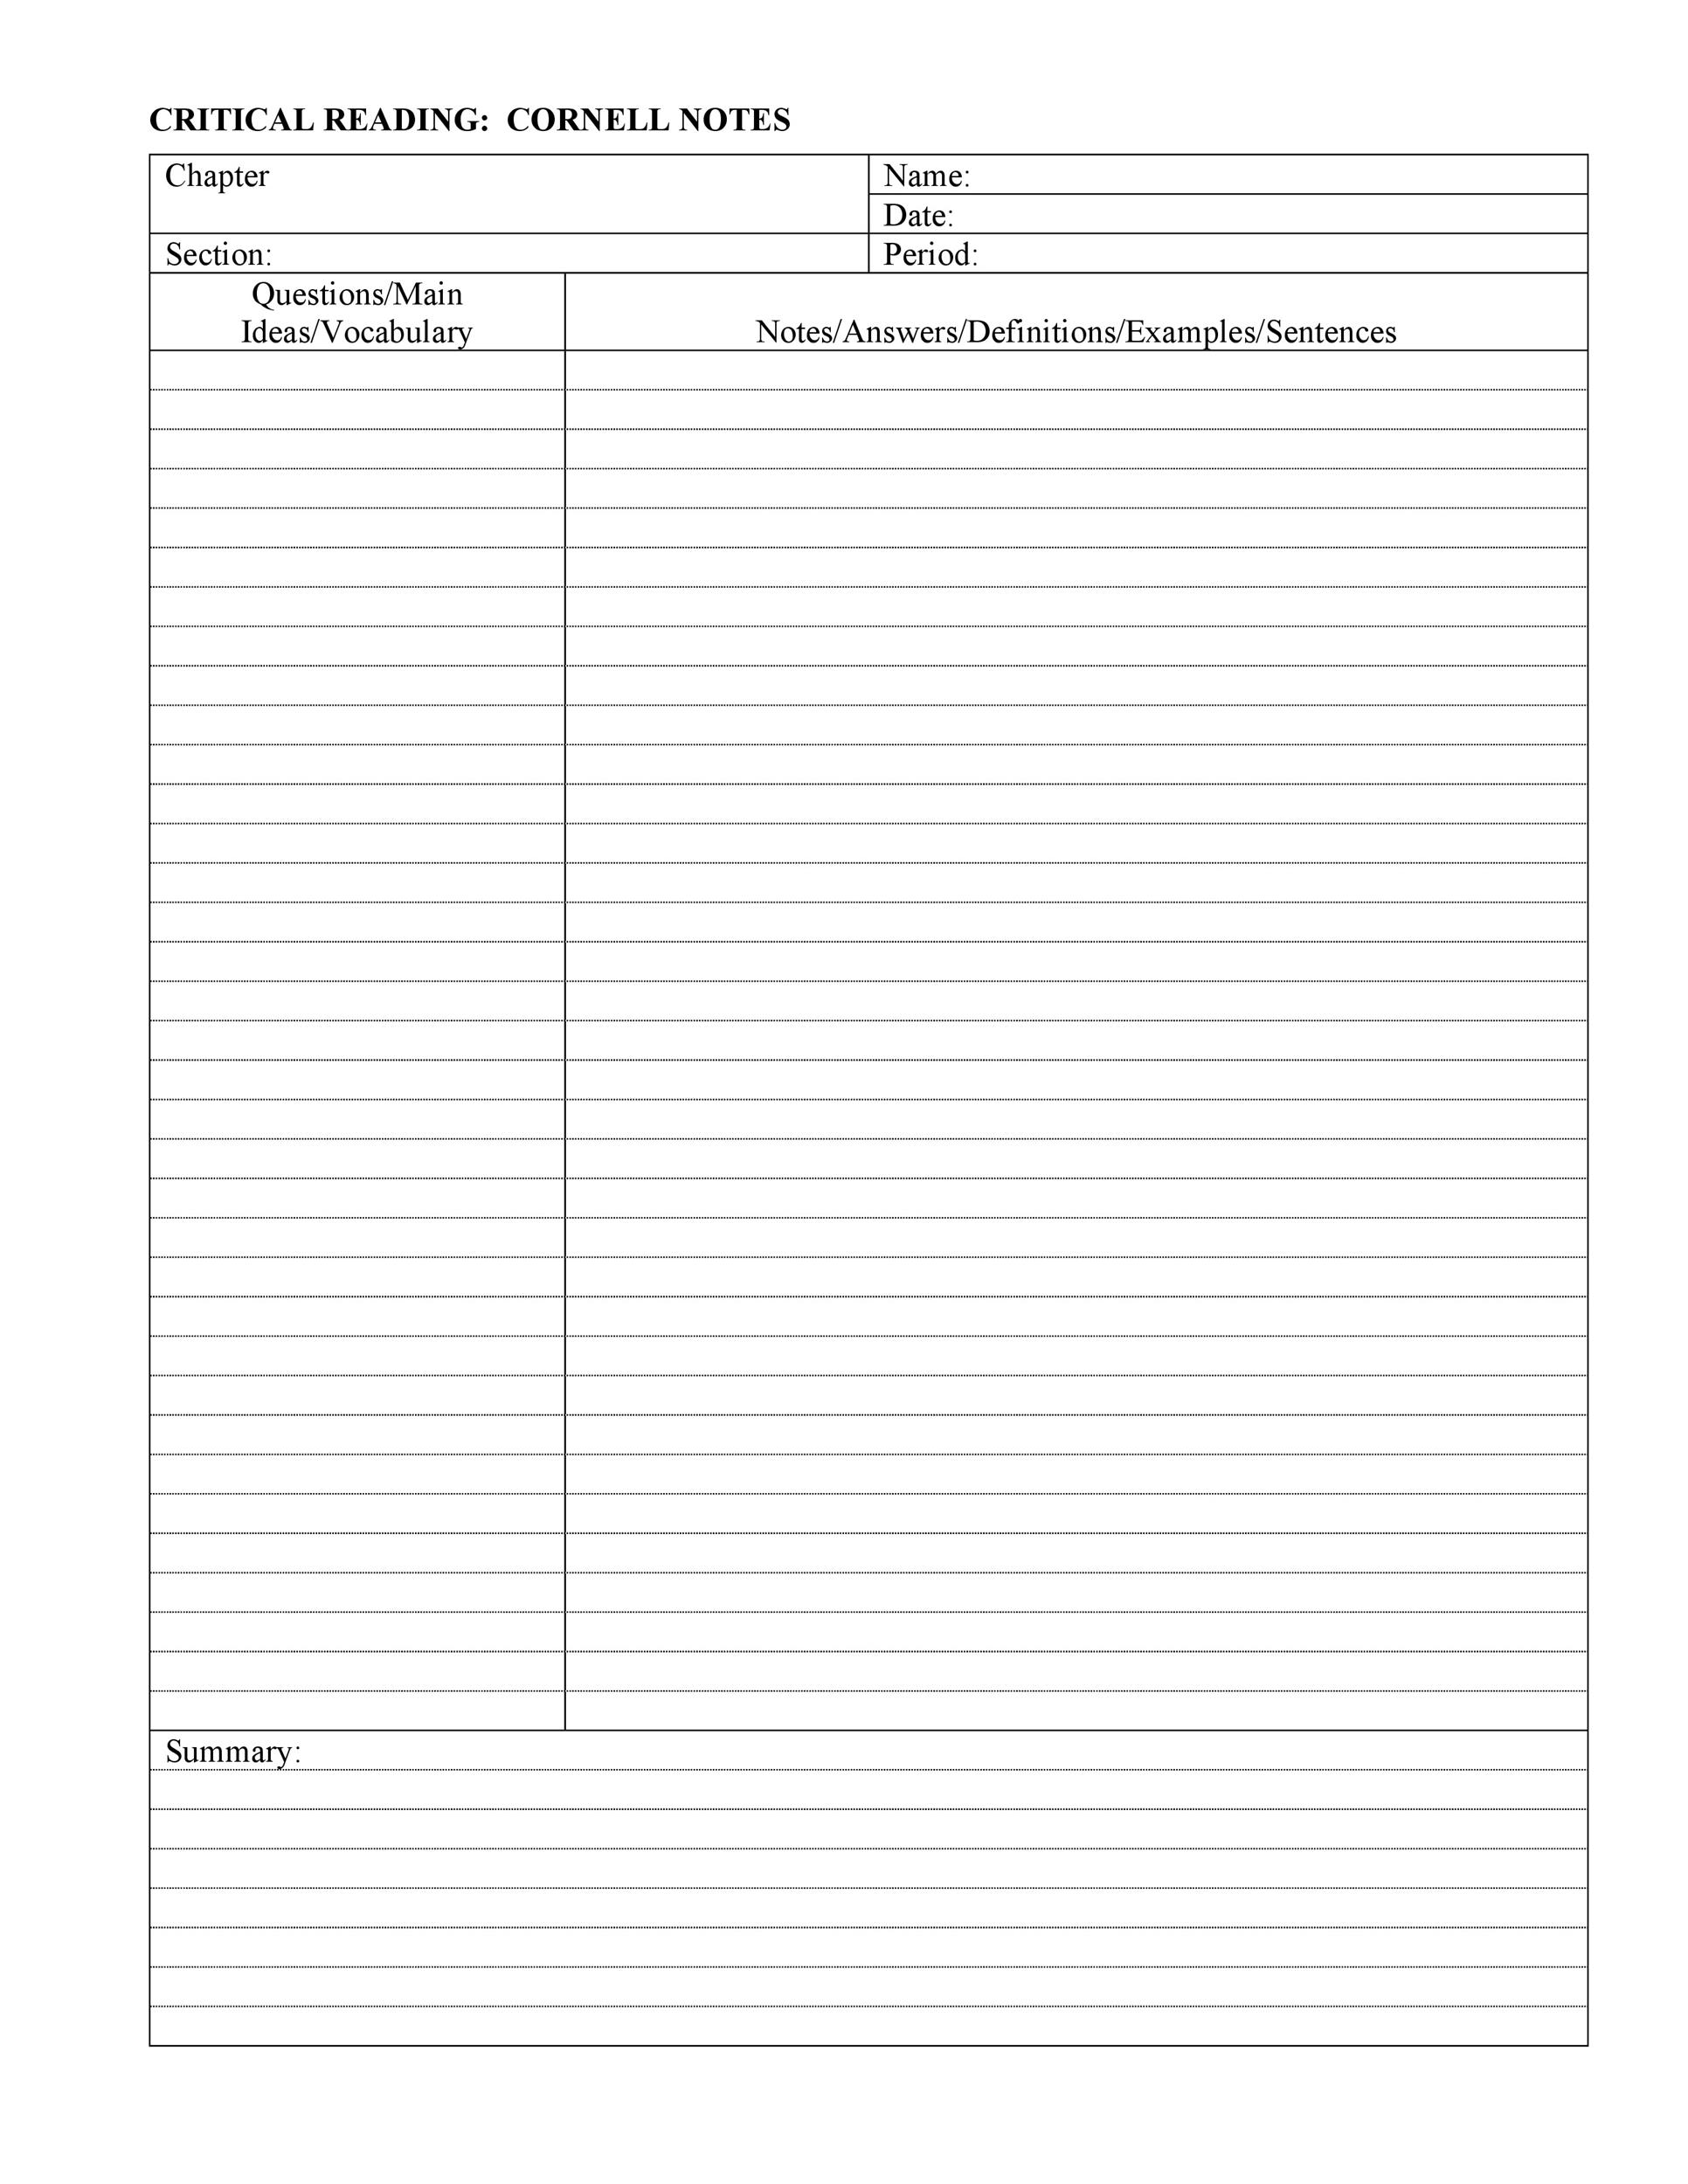 Cornell Note Template Printable from templatelab.com